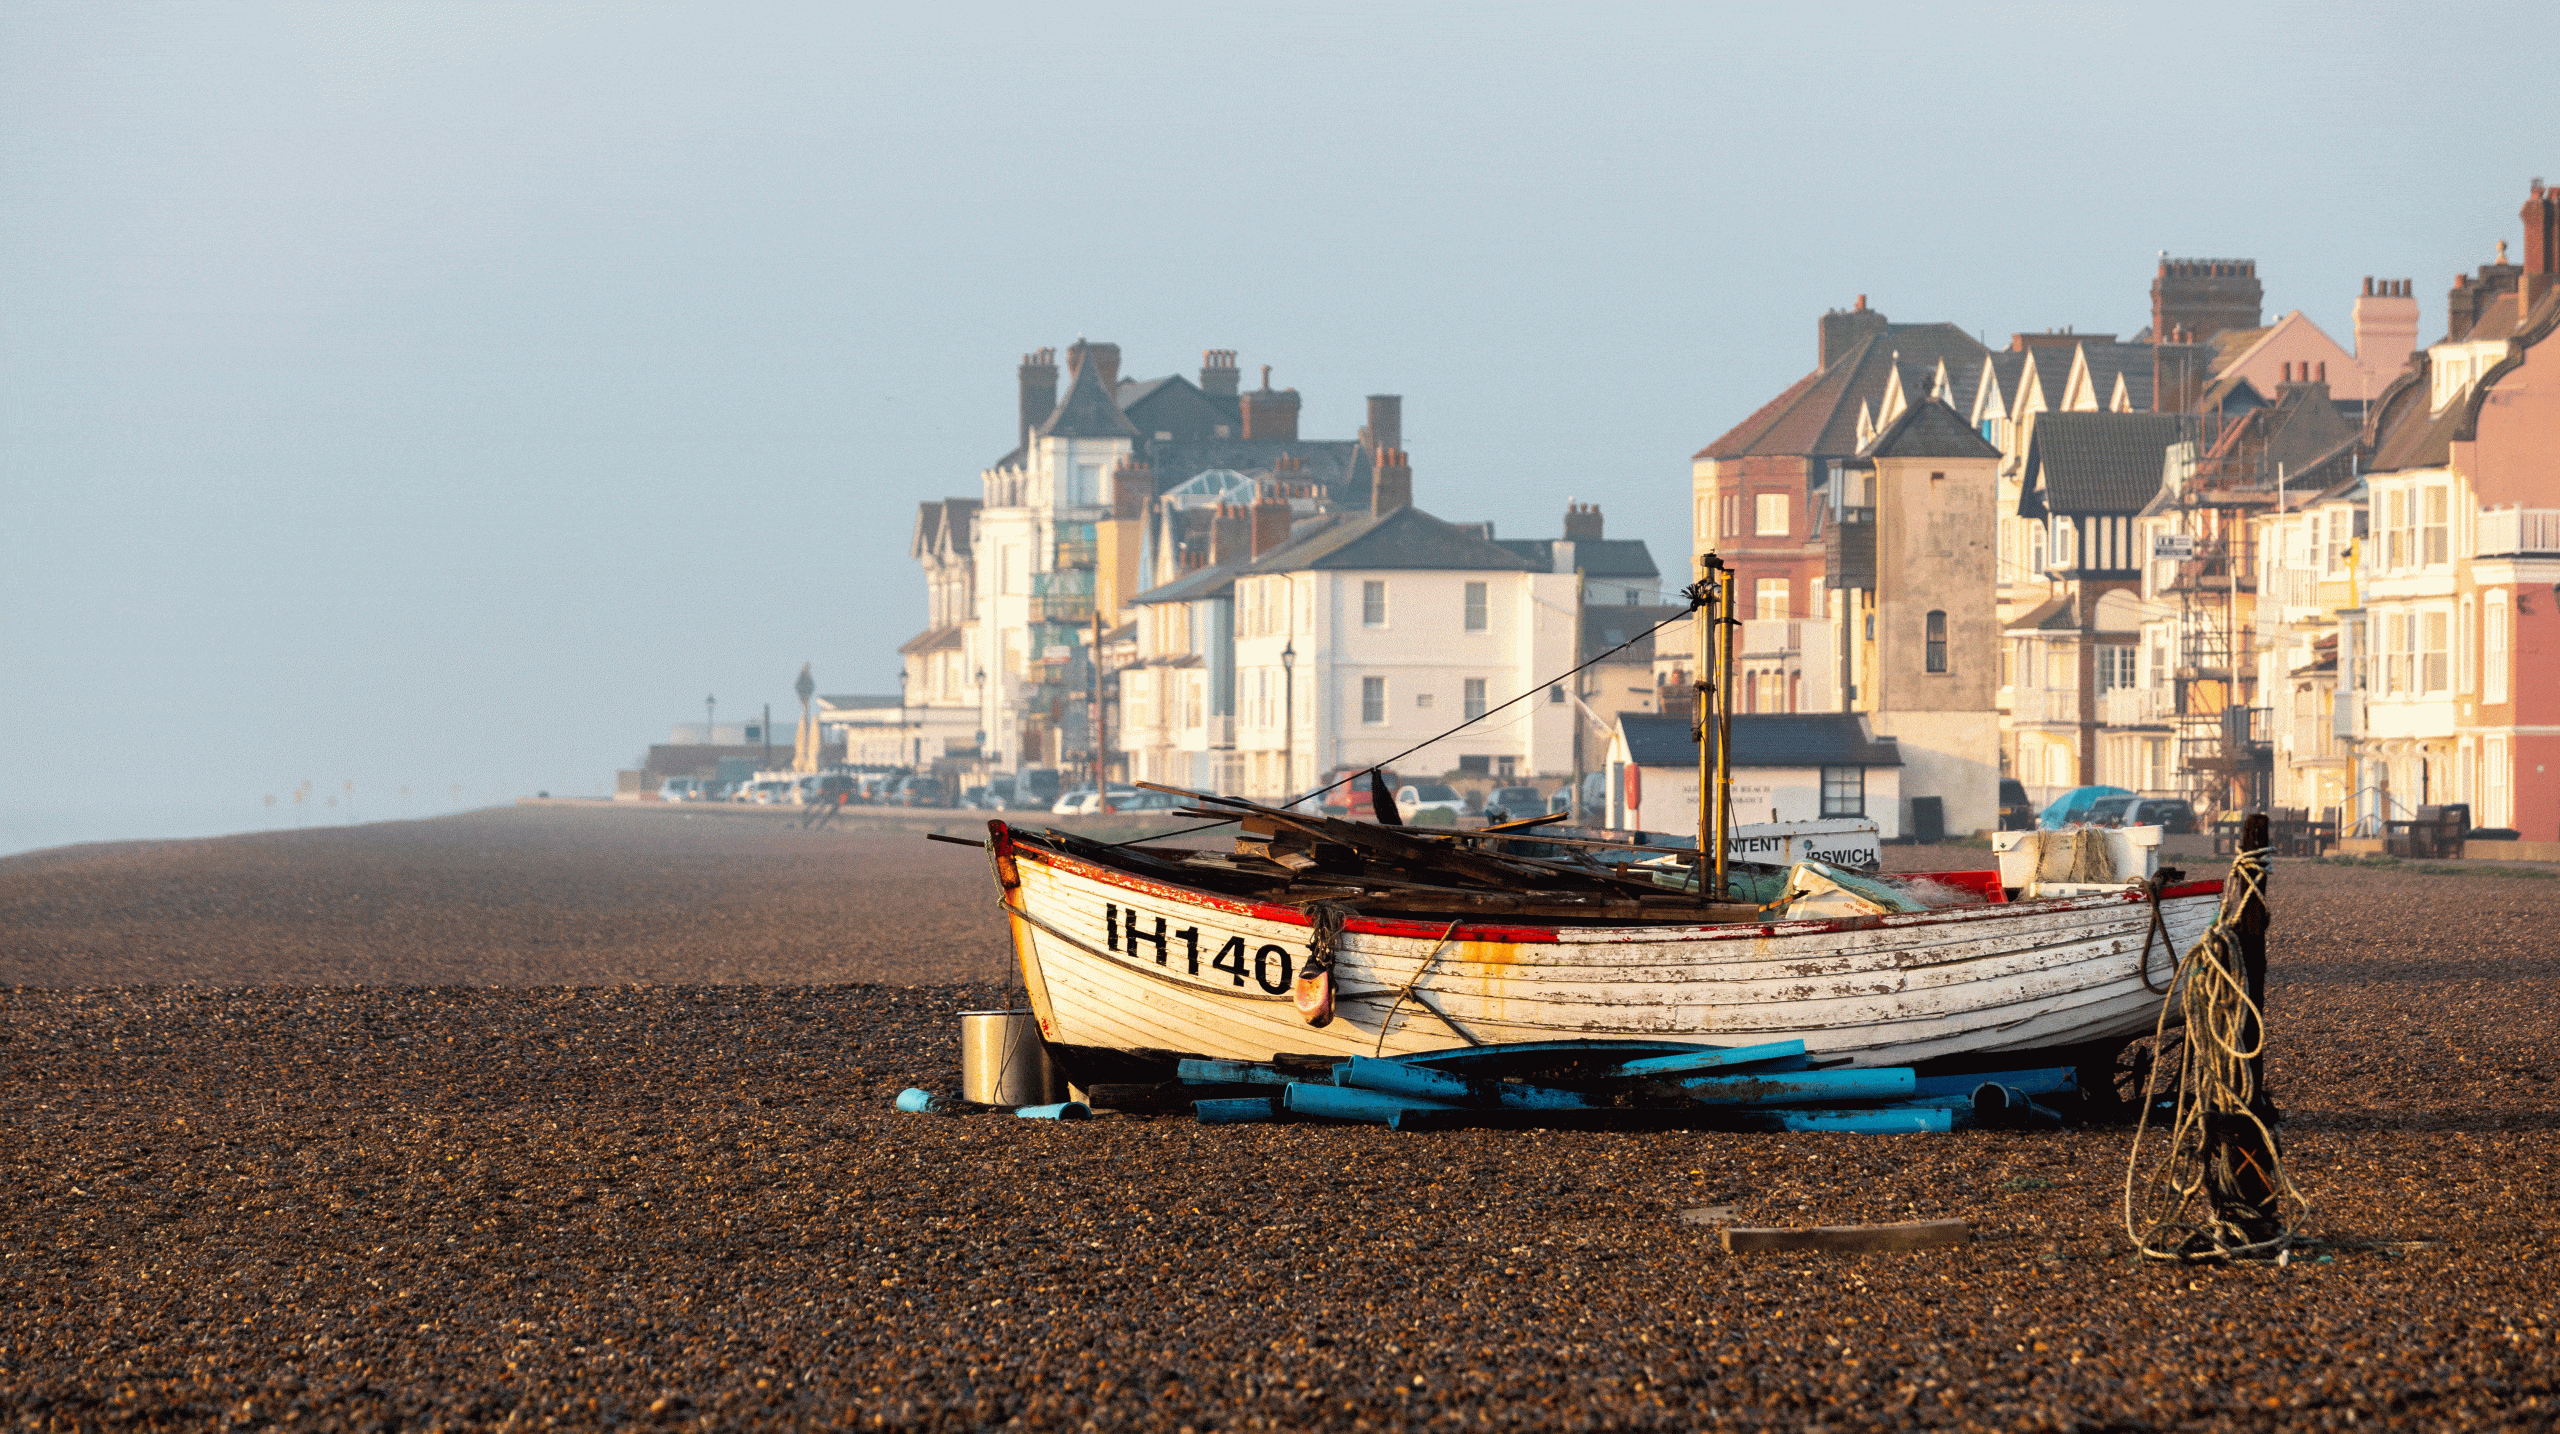 The remains of old fishing boats on the Aldeburgh beach, Suffolk. Here, the local catch includes sea bass, whiting and skate. Image: Getty